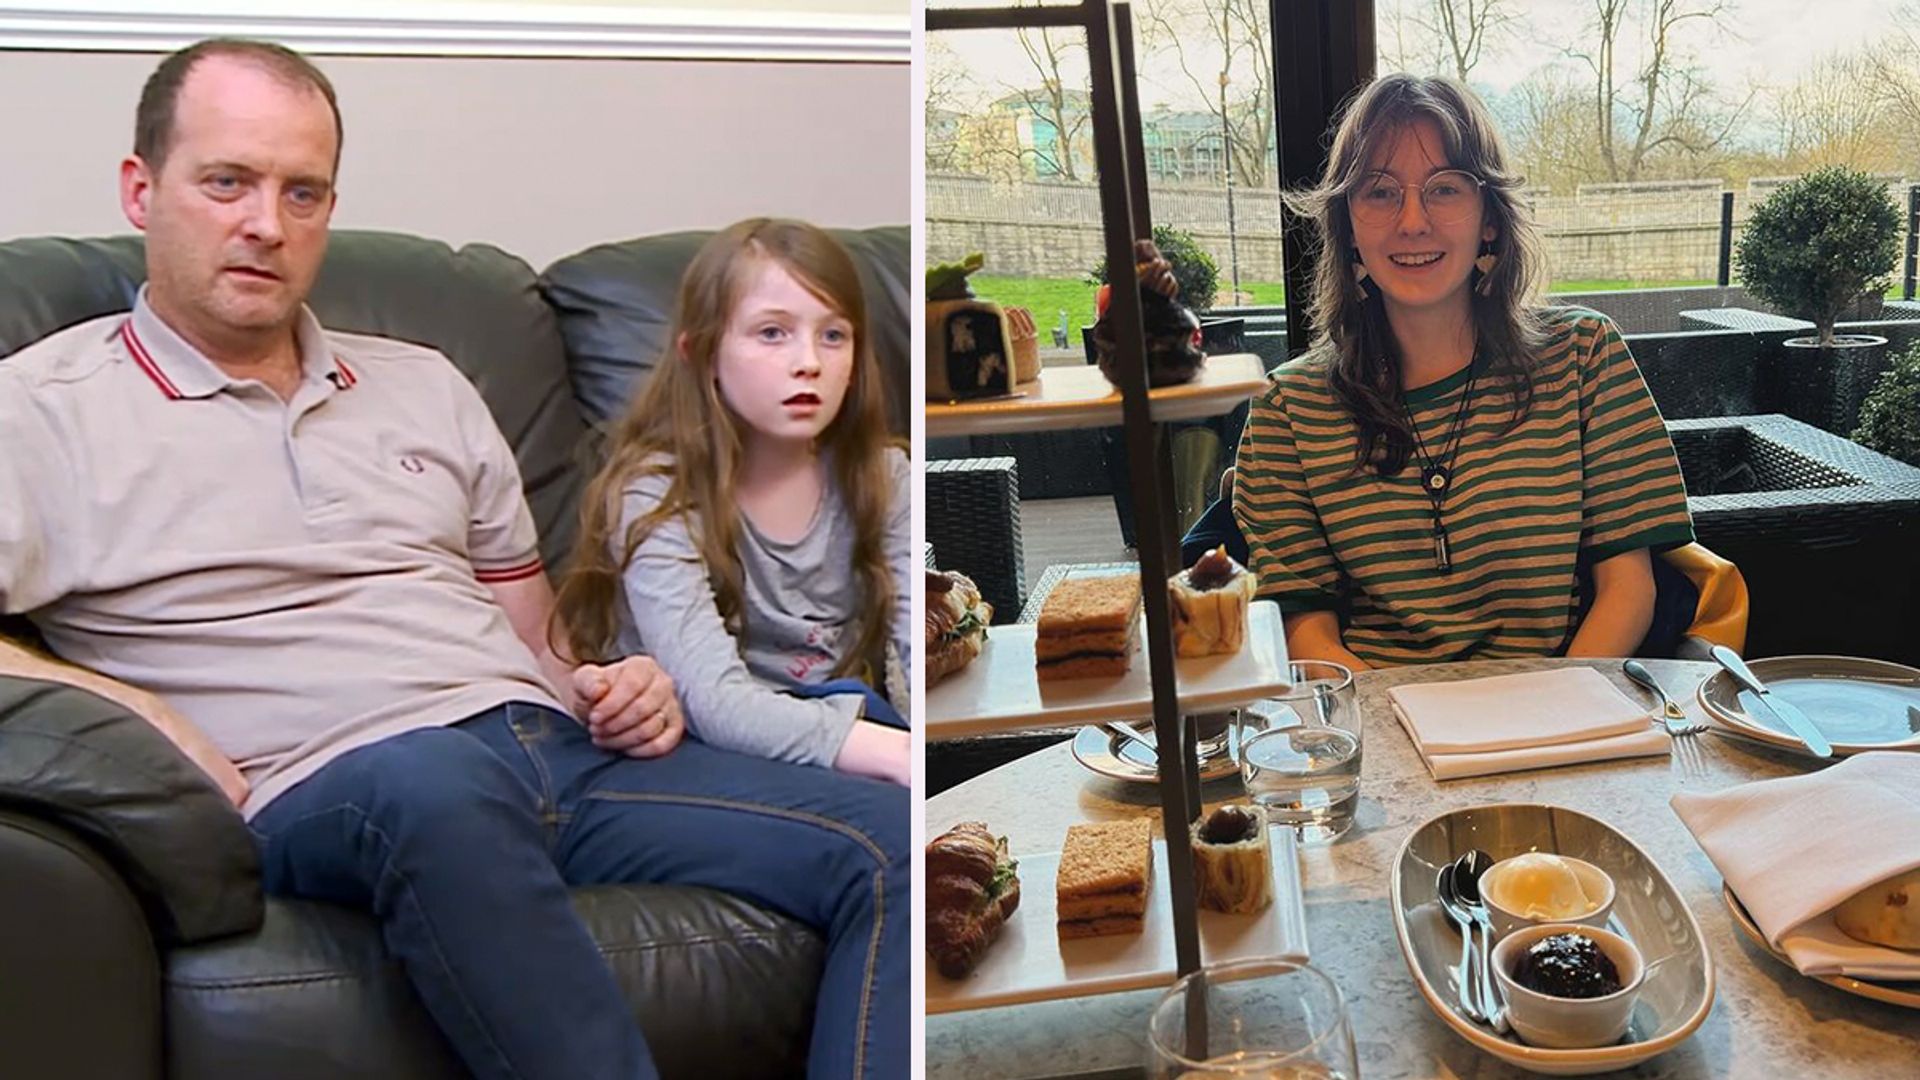 Gogglebox child star looks so grown-up ten years after show debut